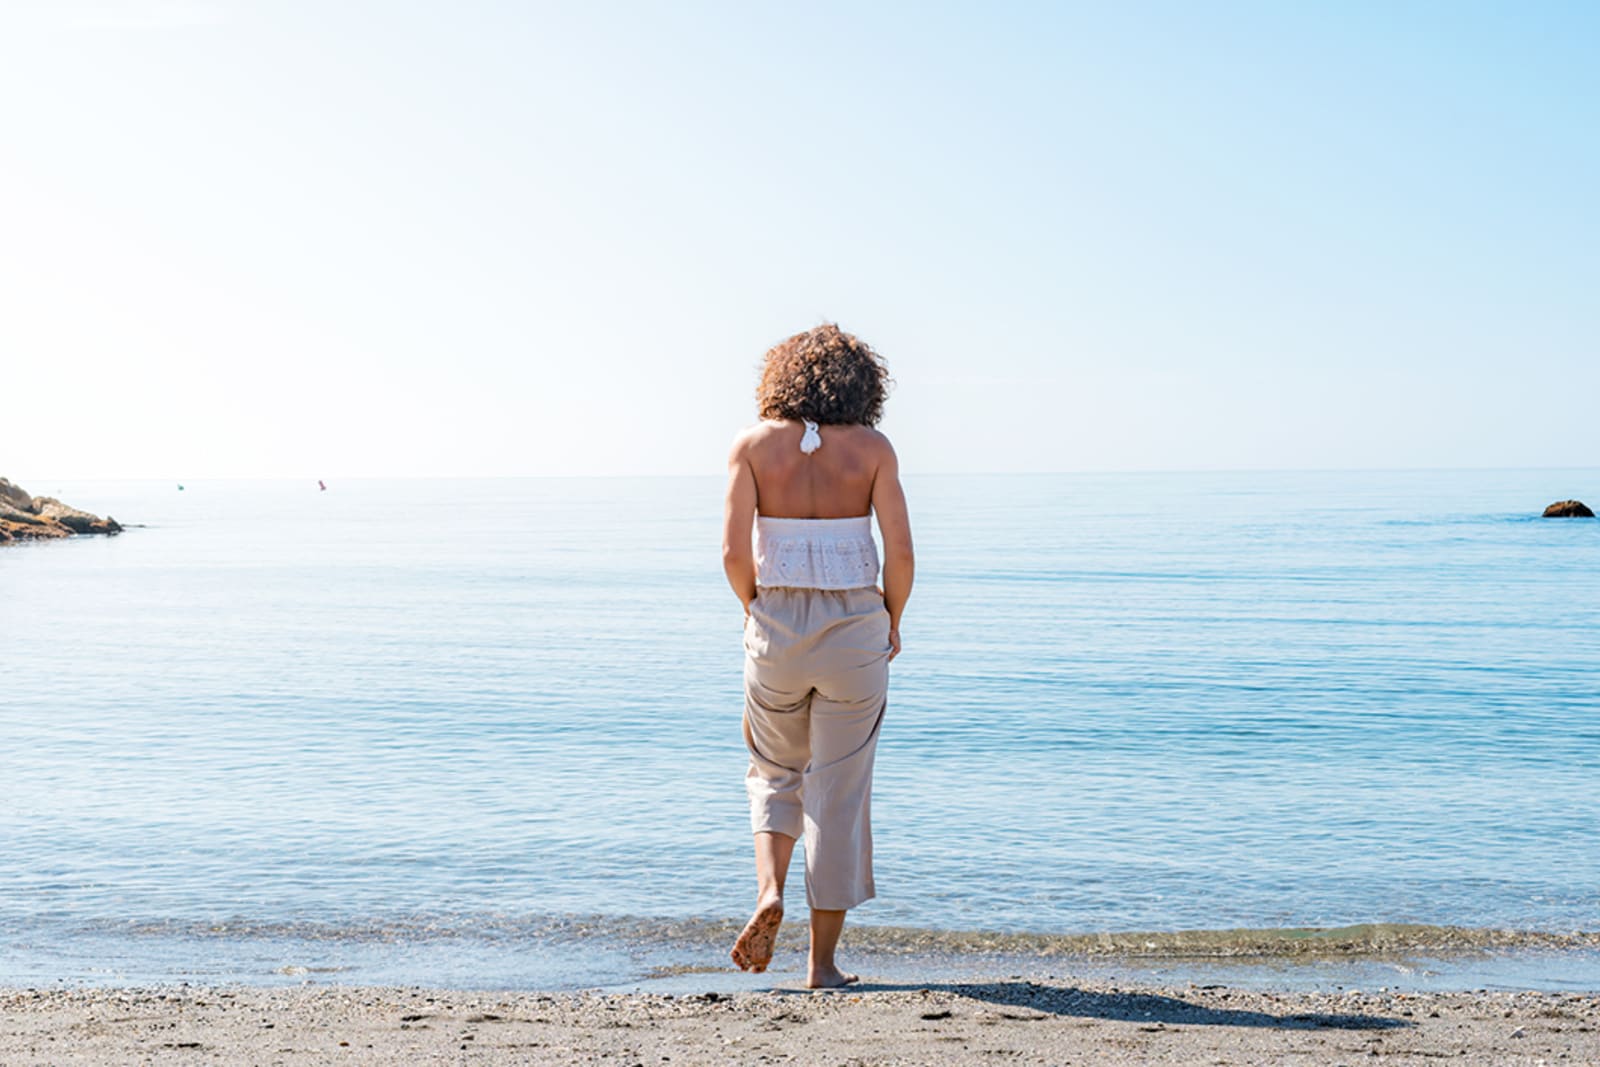 A woman standing on a beach; she's wearing a neutral outfit from the capsule wardrobe she packed